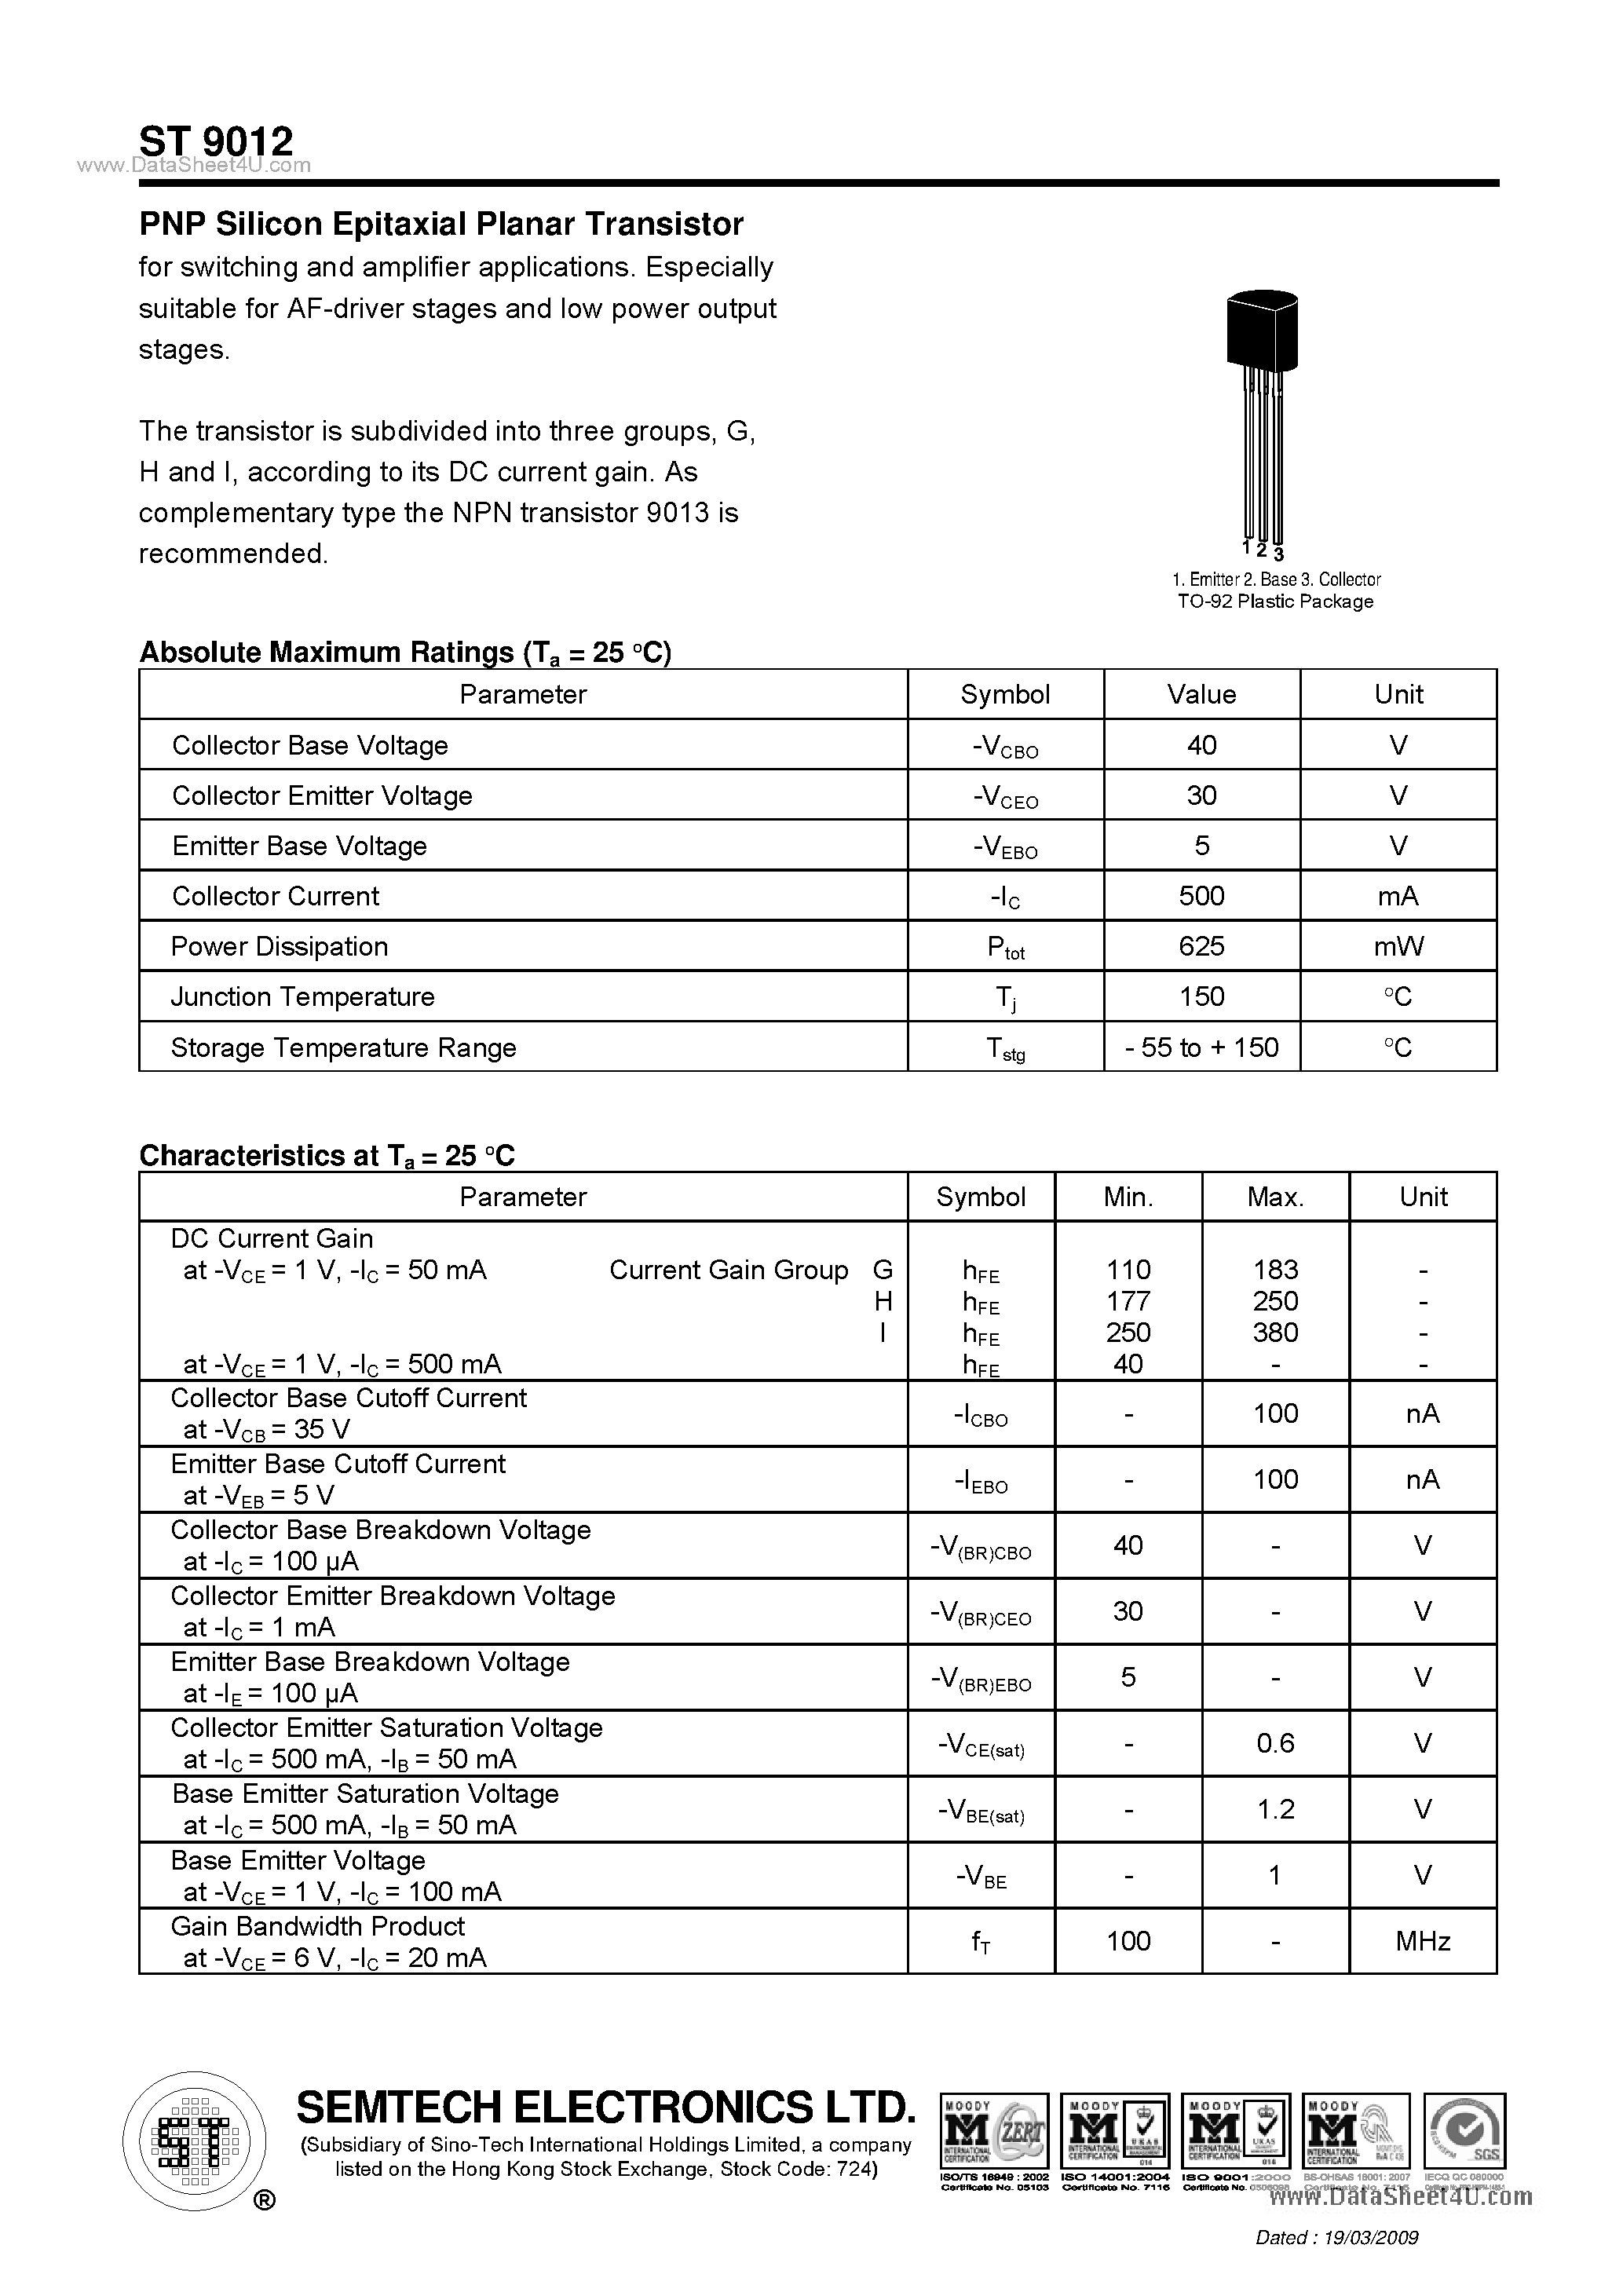 Datasheet ST9012 - PNP Silicon Epitaxial Planar Transistor page 1